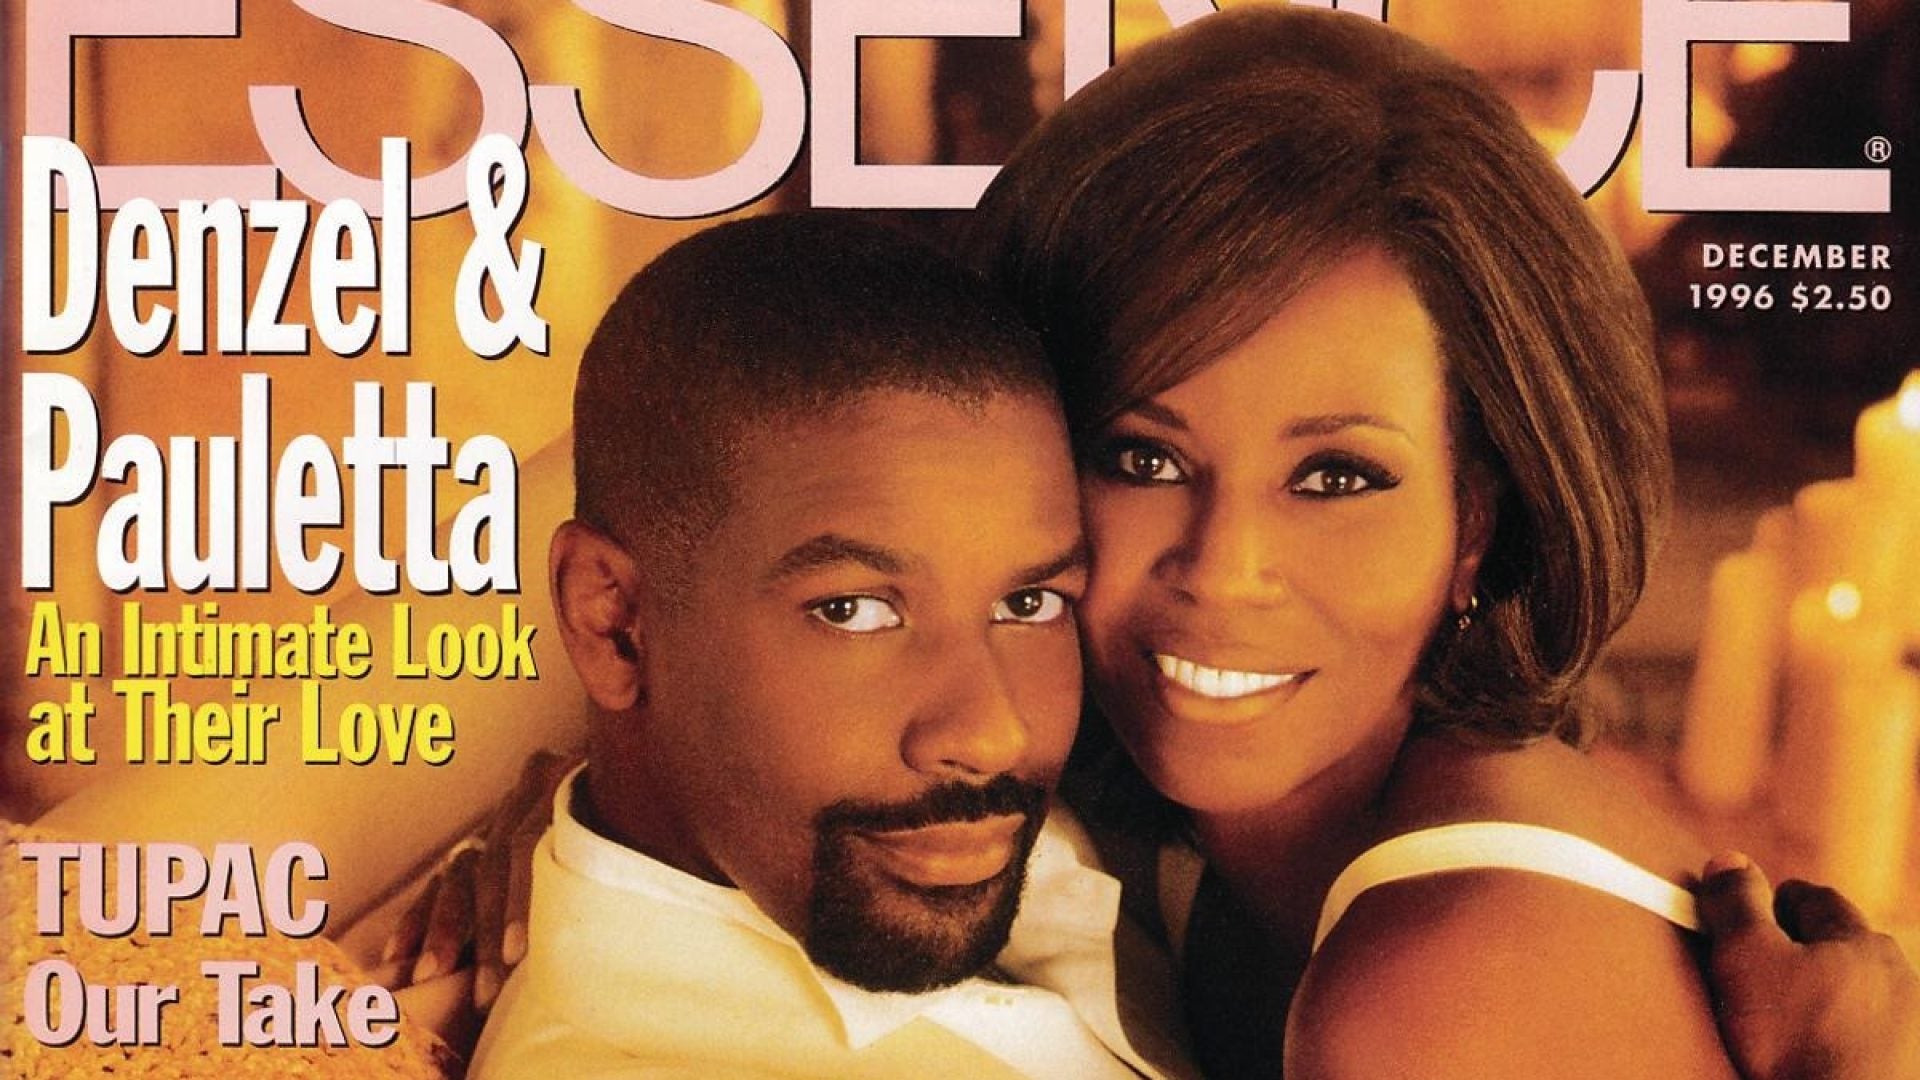 A Look Back At Denzel Washington On The Cover Of ESSENCE Over The Years